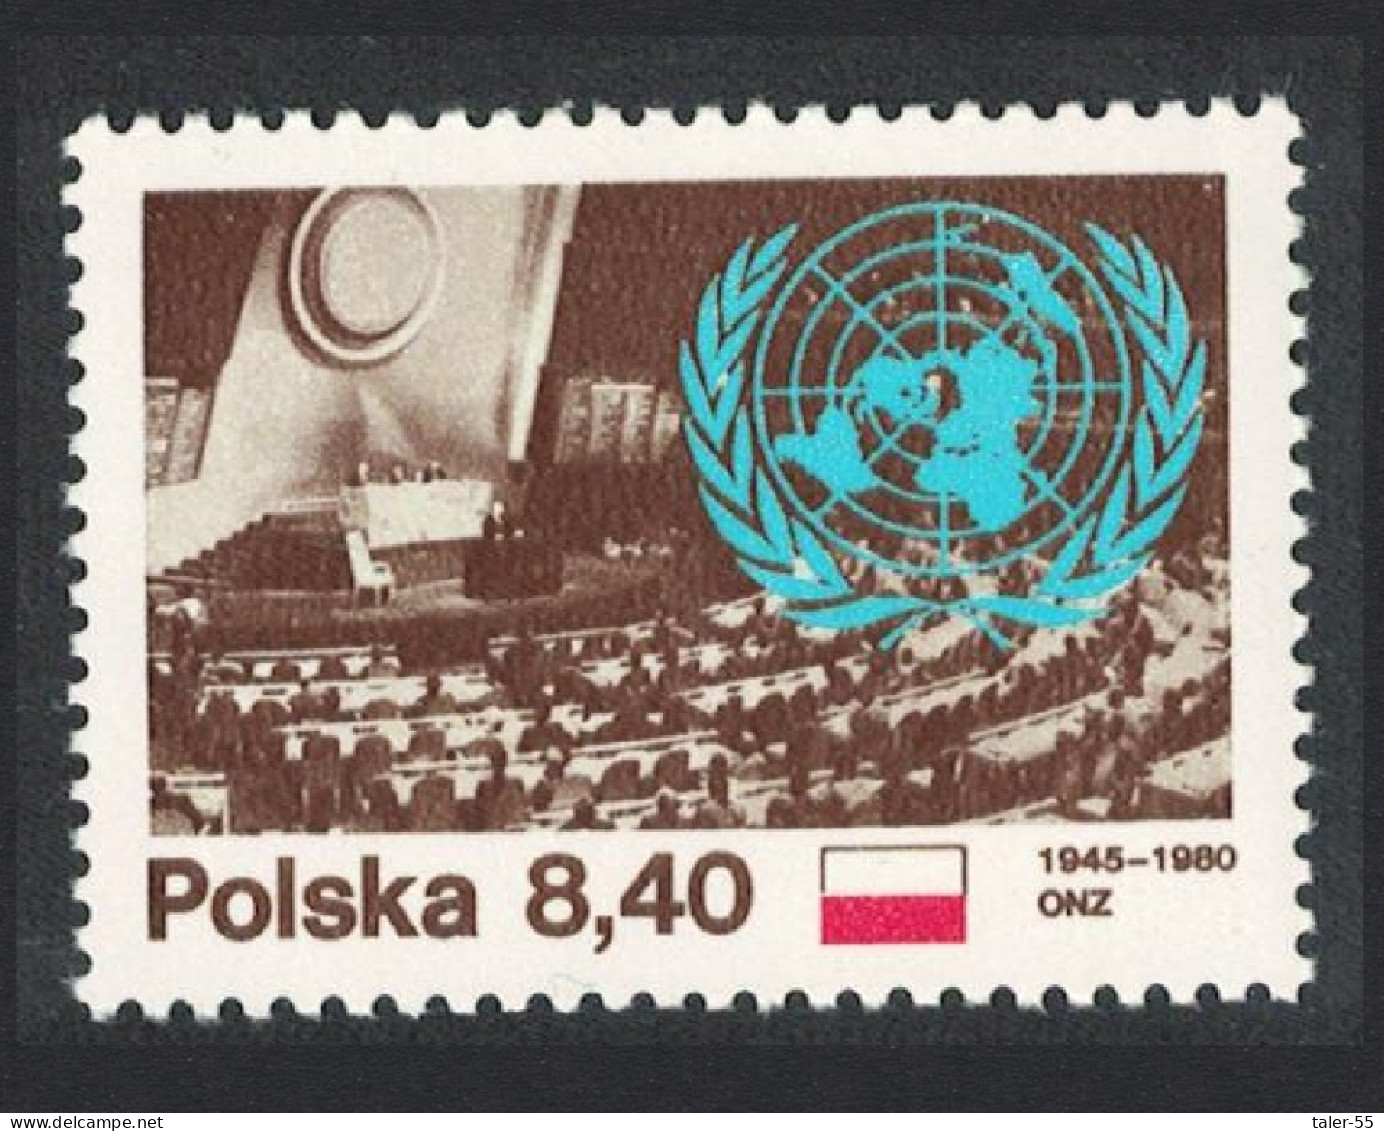 Poland 35th Anniversary Of UNO 1980 MNH SG#2703 Sc#2417 - Unused Stamps